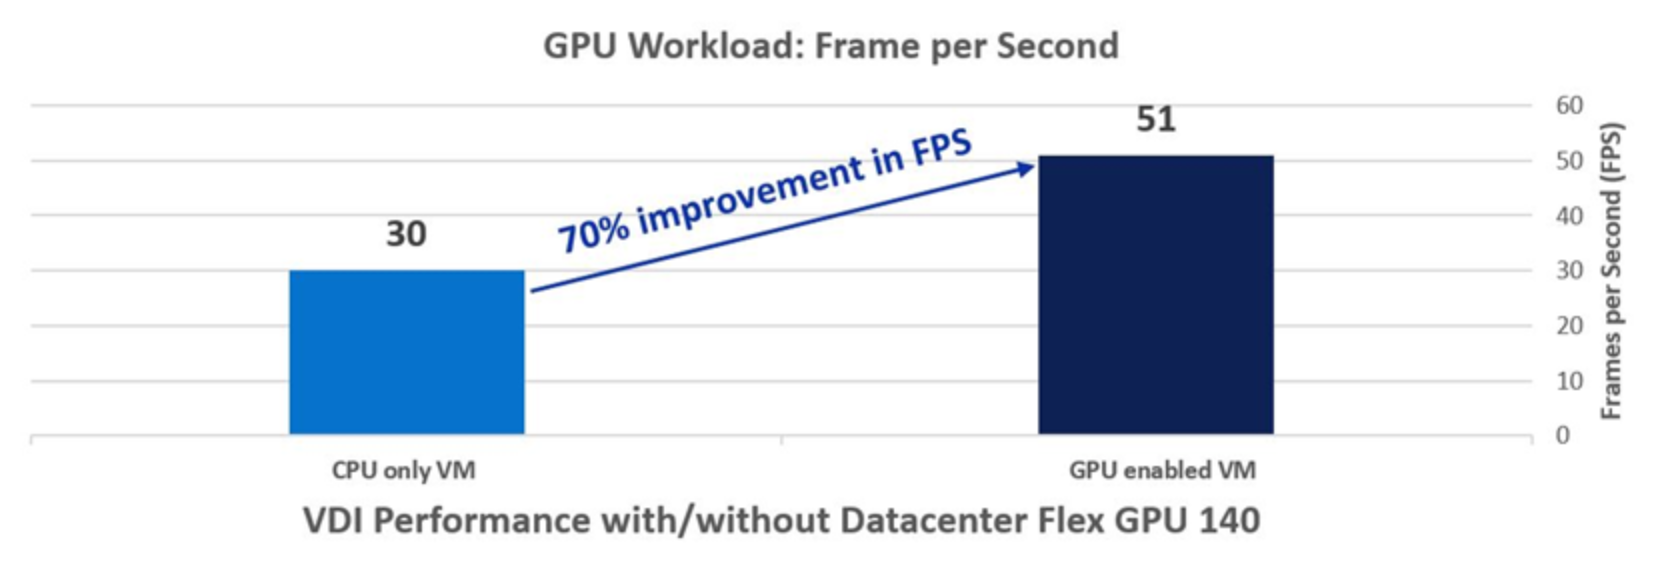 This graph illustrates the GPU Workload in Frames per second for CPU-only VMs and GPU-enabled VMs. There is a 70% improvement in FPS from 30 for CPU-only to 51 for GPU-enabled.